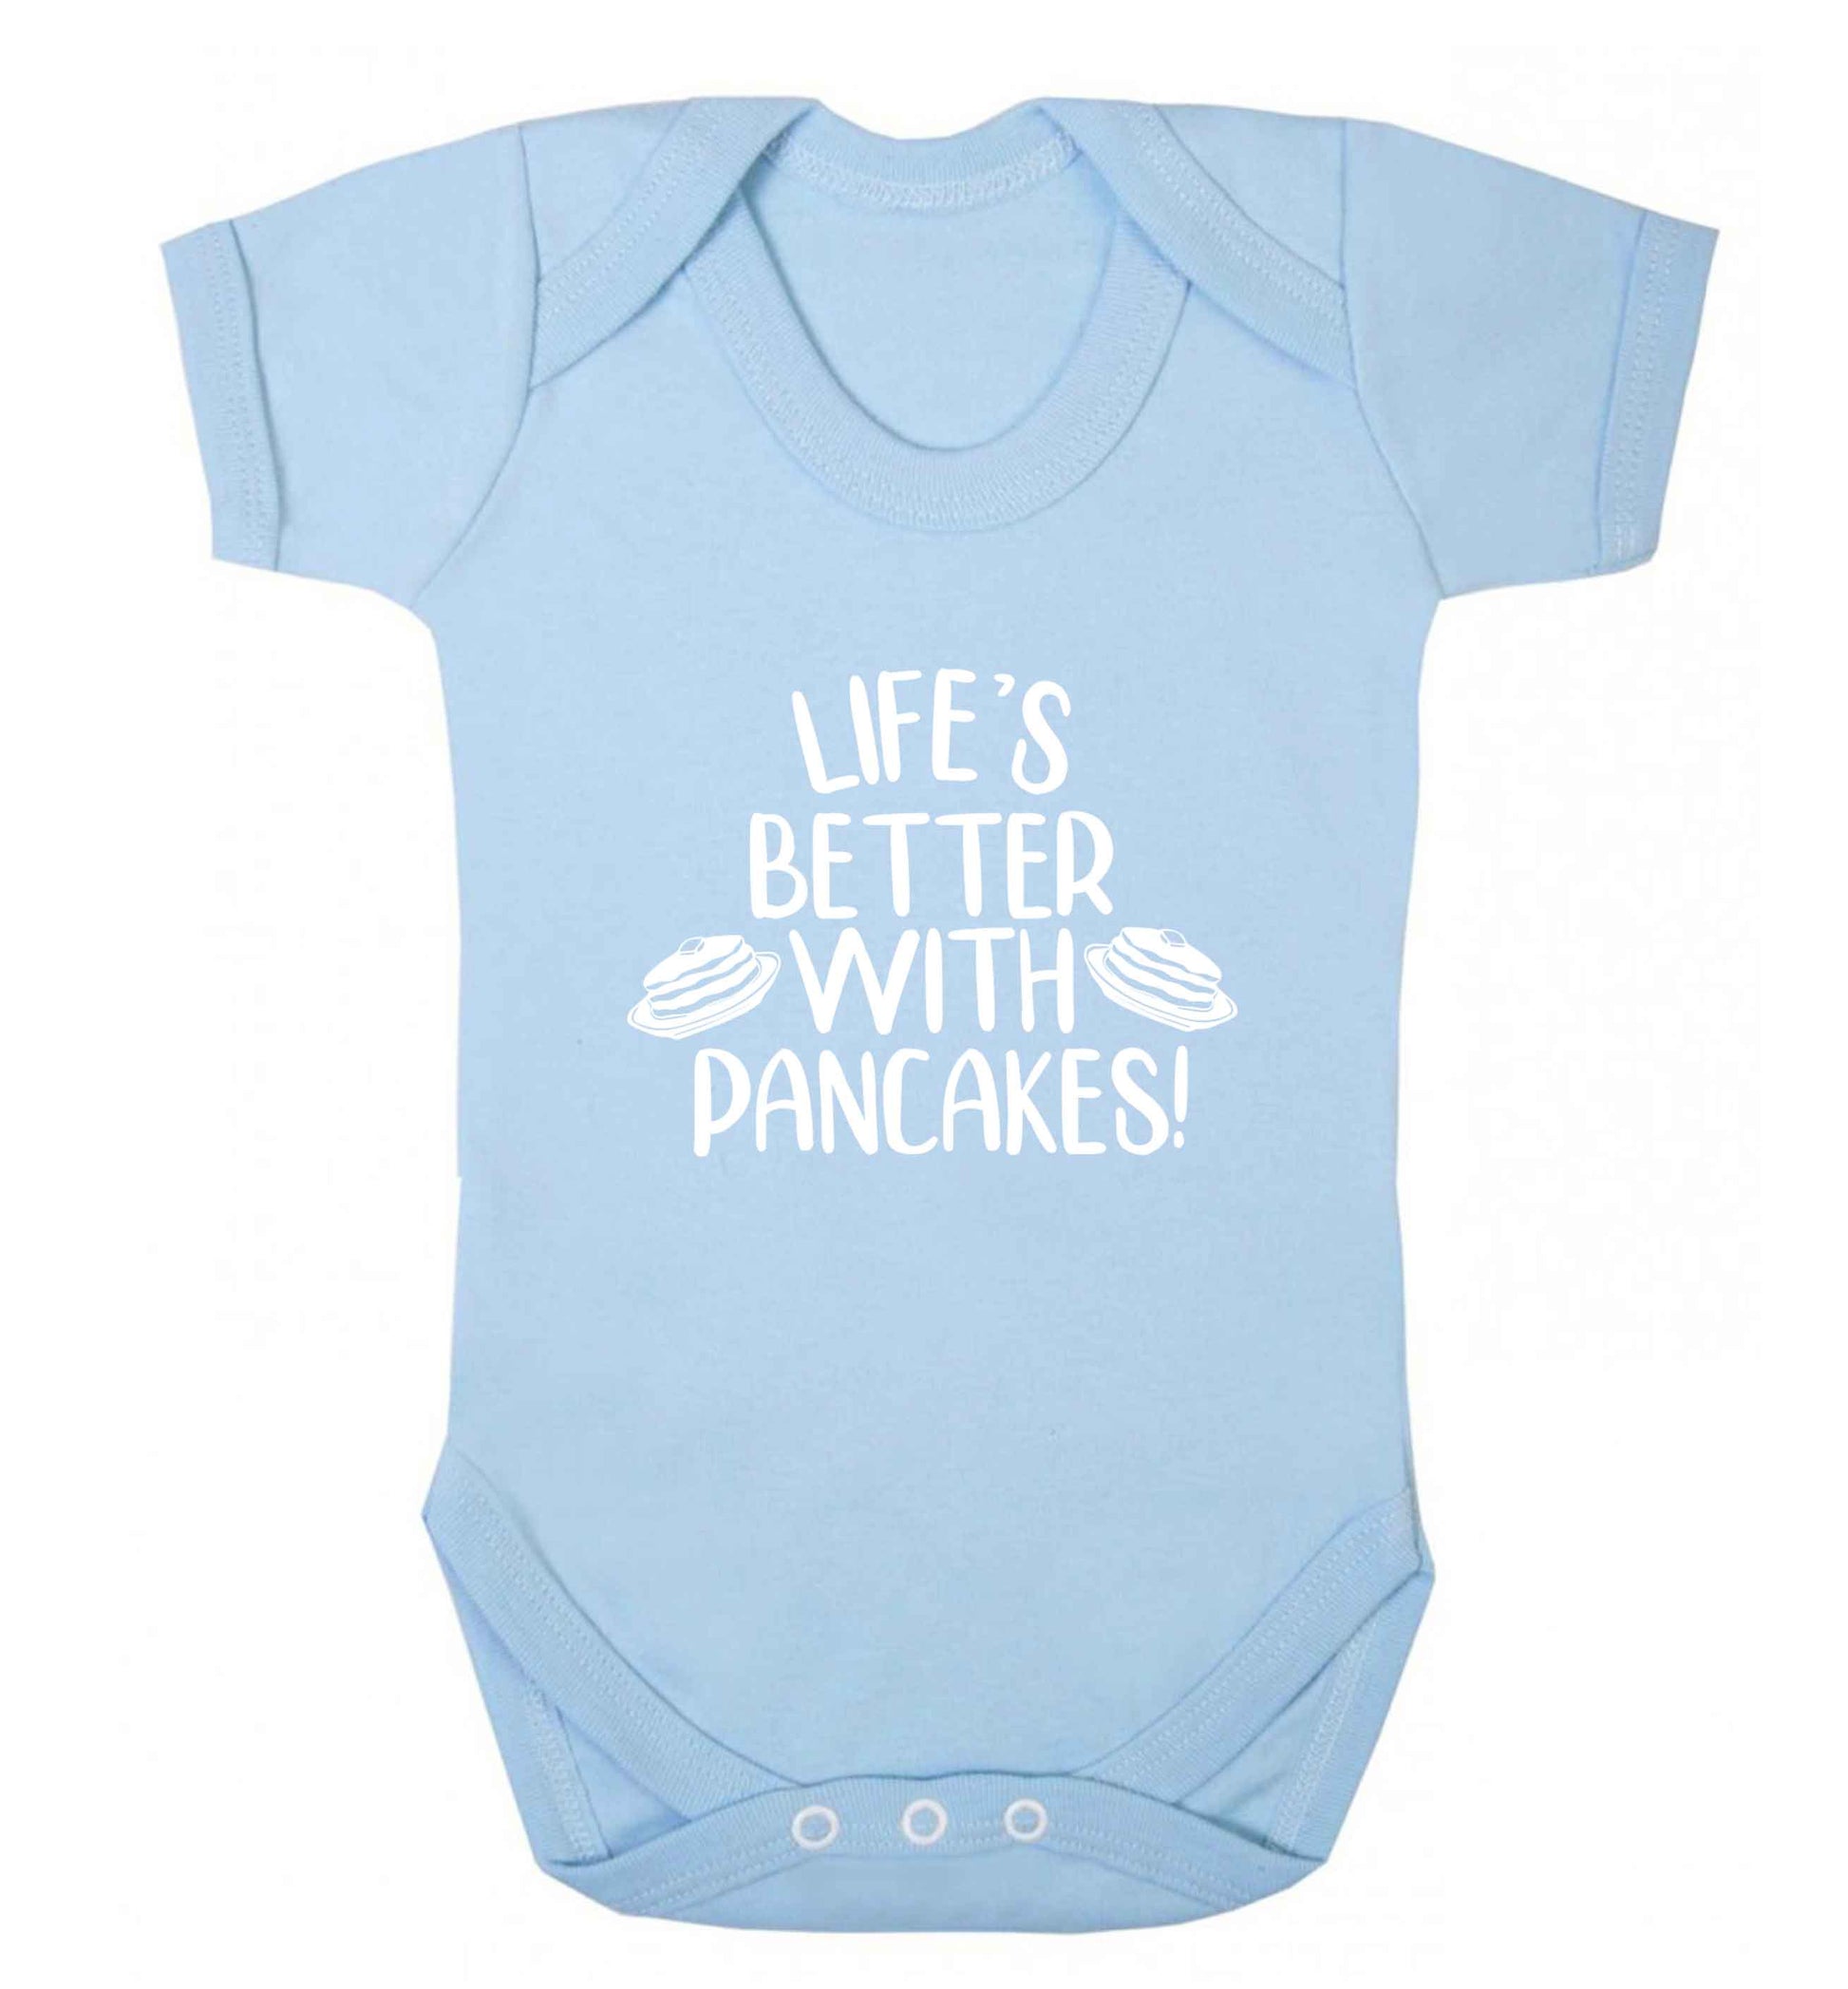 Life's better with pancakes baby vest pale blue 18-24 months